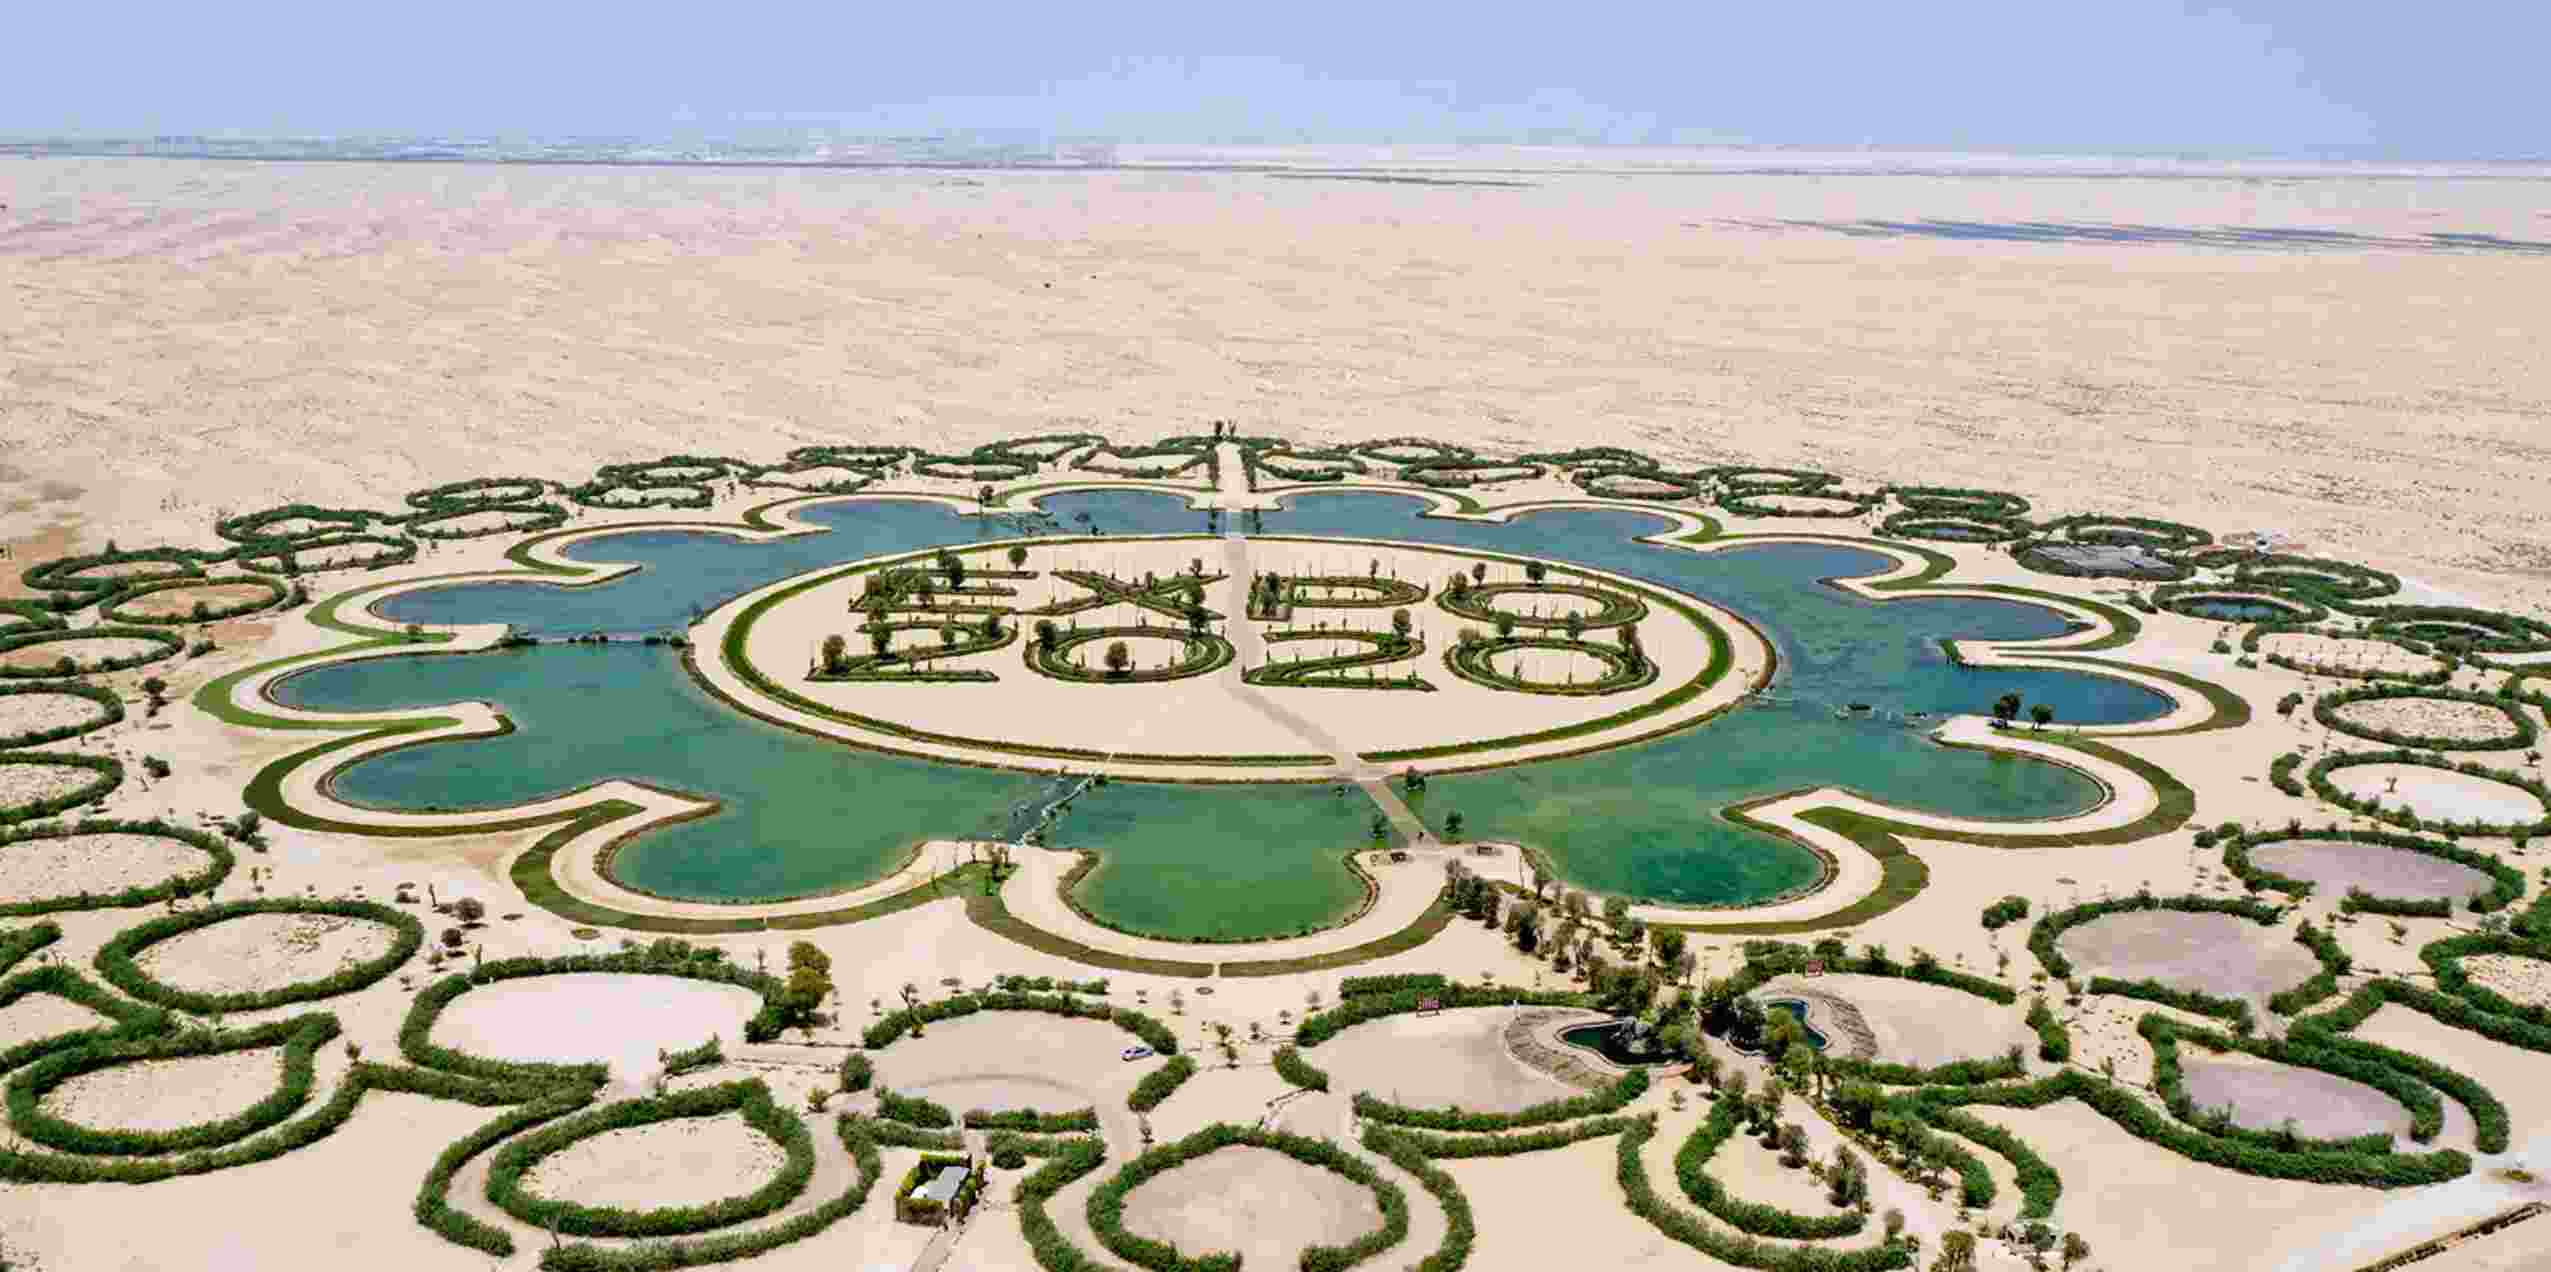 The Lake of Expo 2020